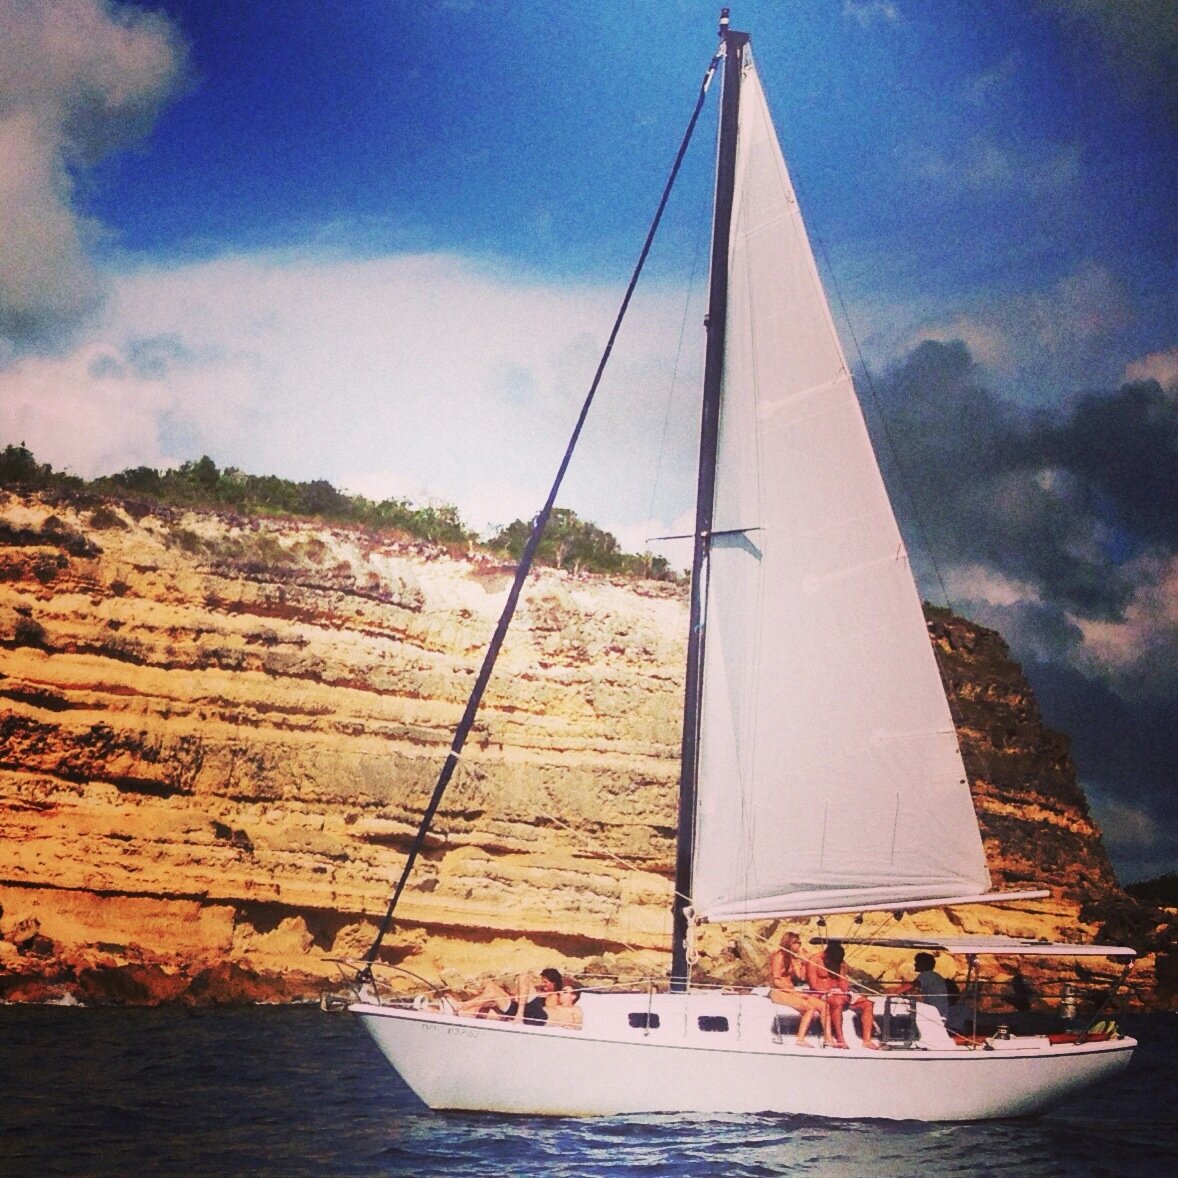 We offer daily sailing, snorkeling, sunset and customized charters year 'round!